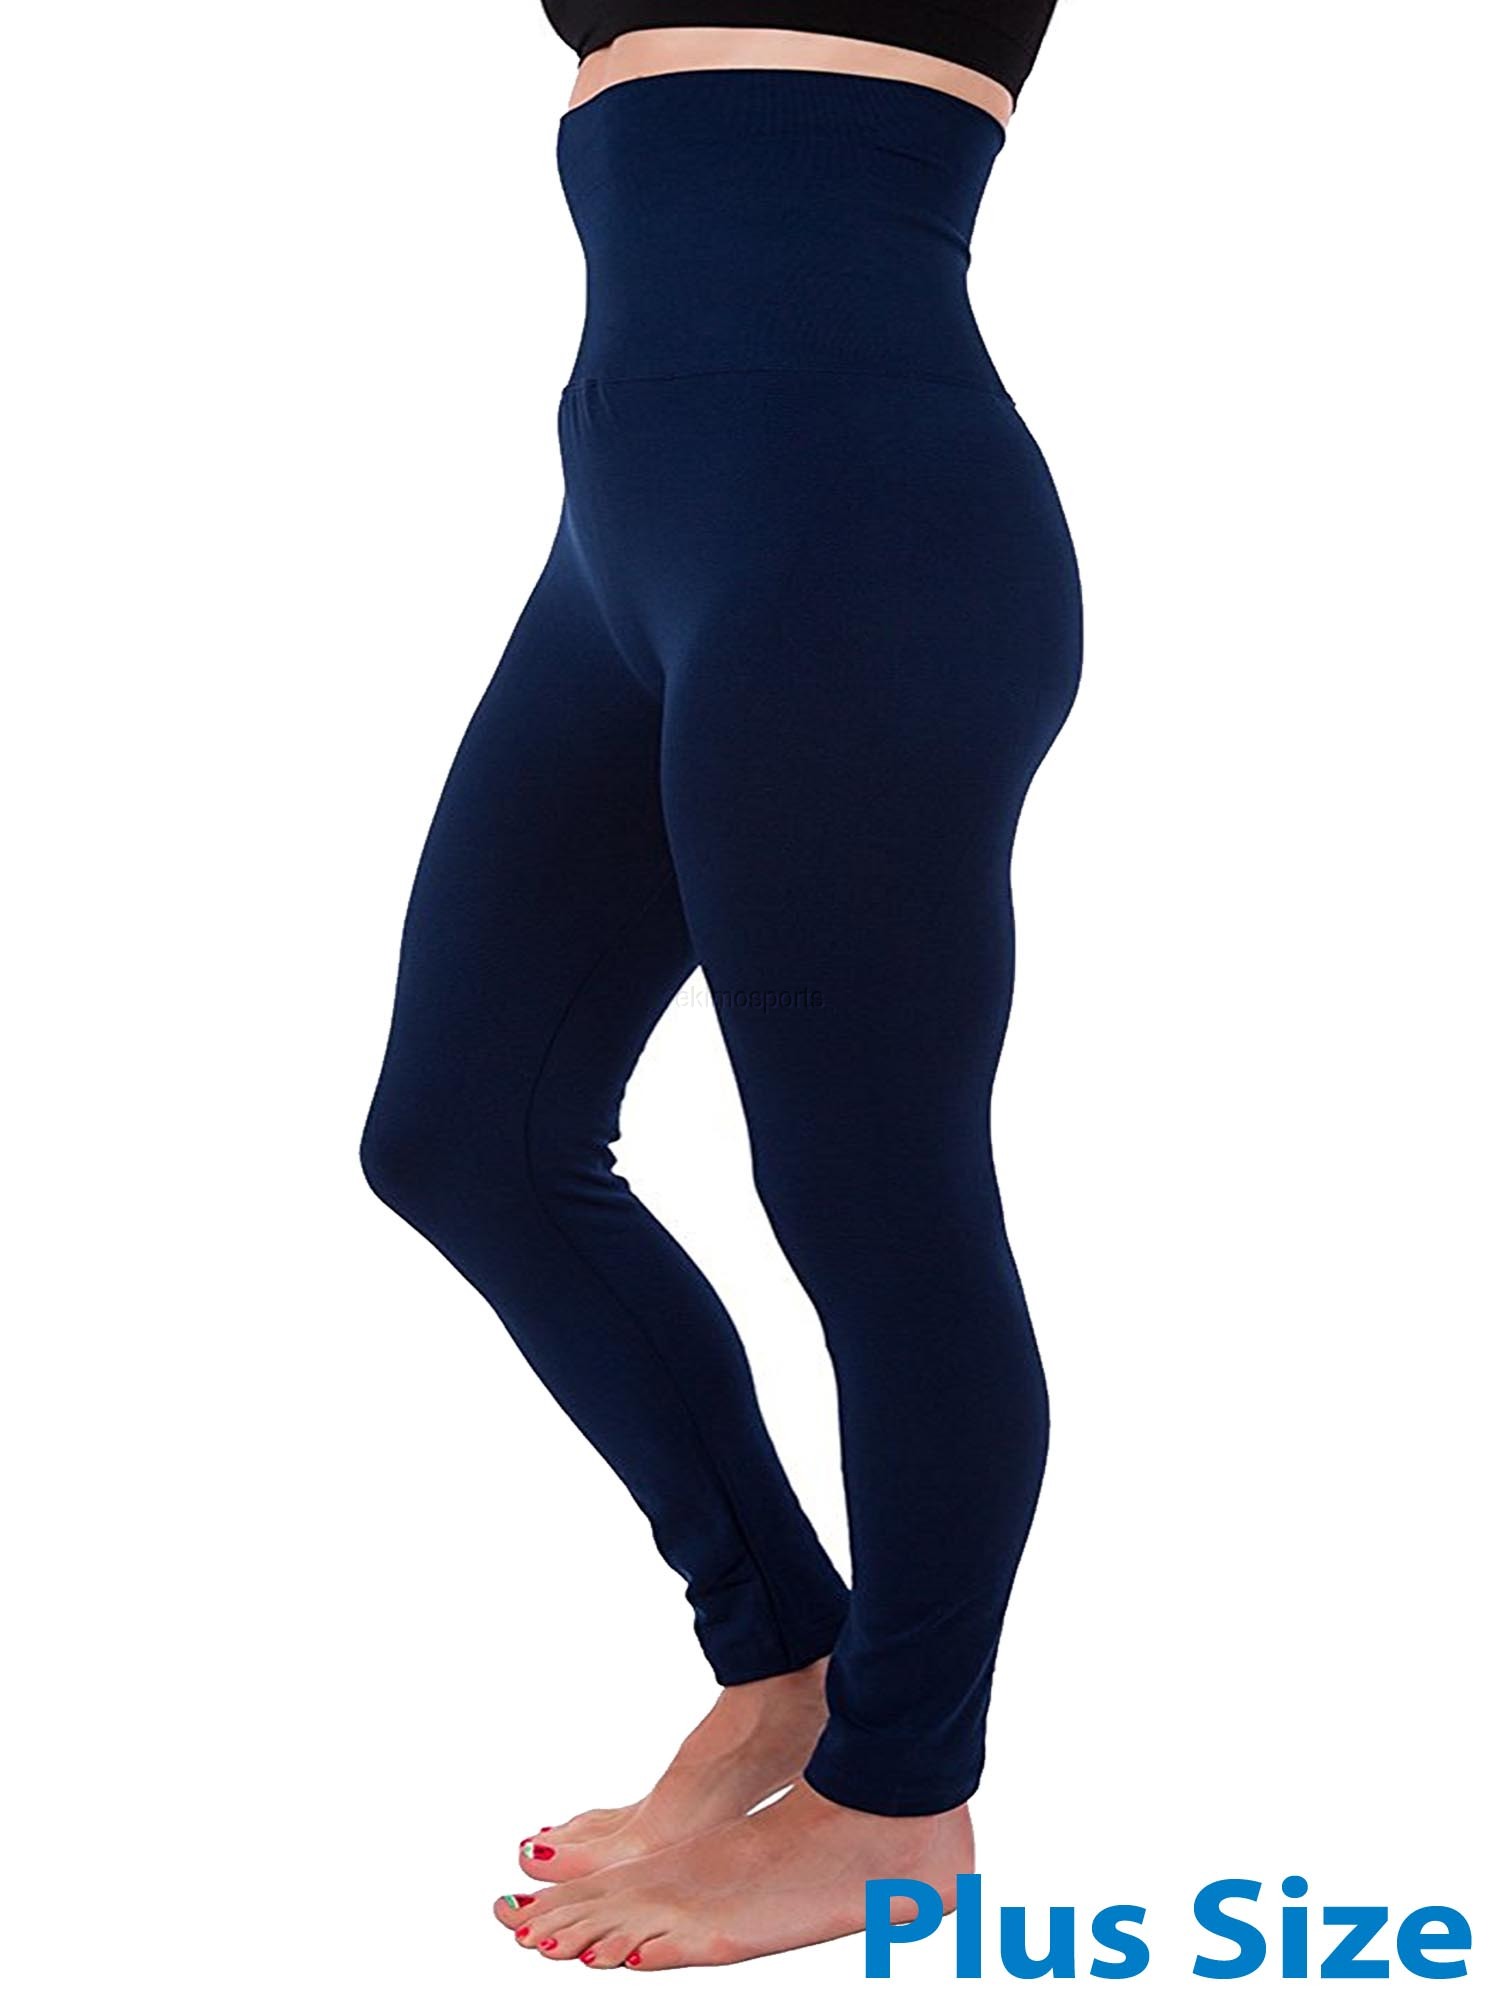 High Waist Tummy Control Full Length Legging Compression Top Pants Fleece Lined Plus Size XL 2XL - image 1 of 4